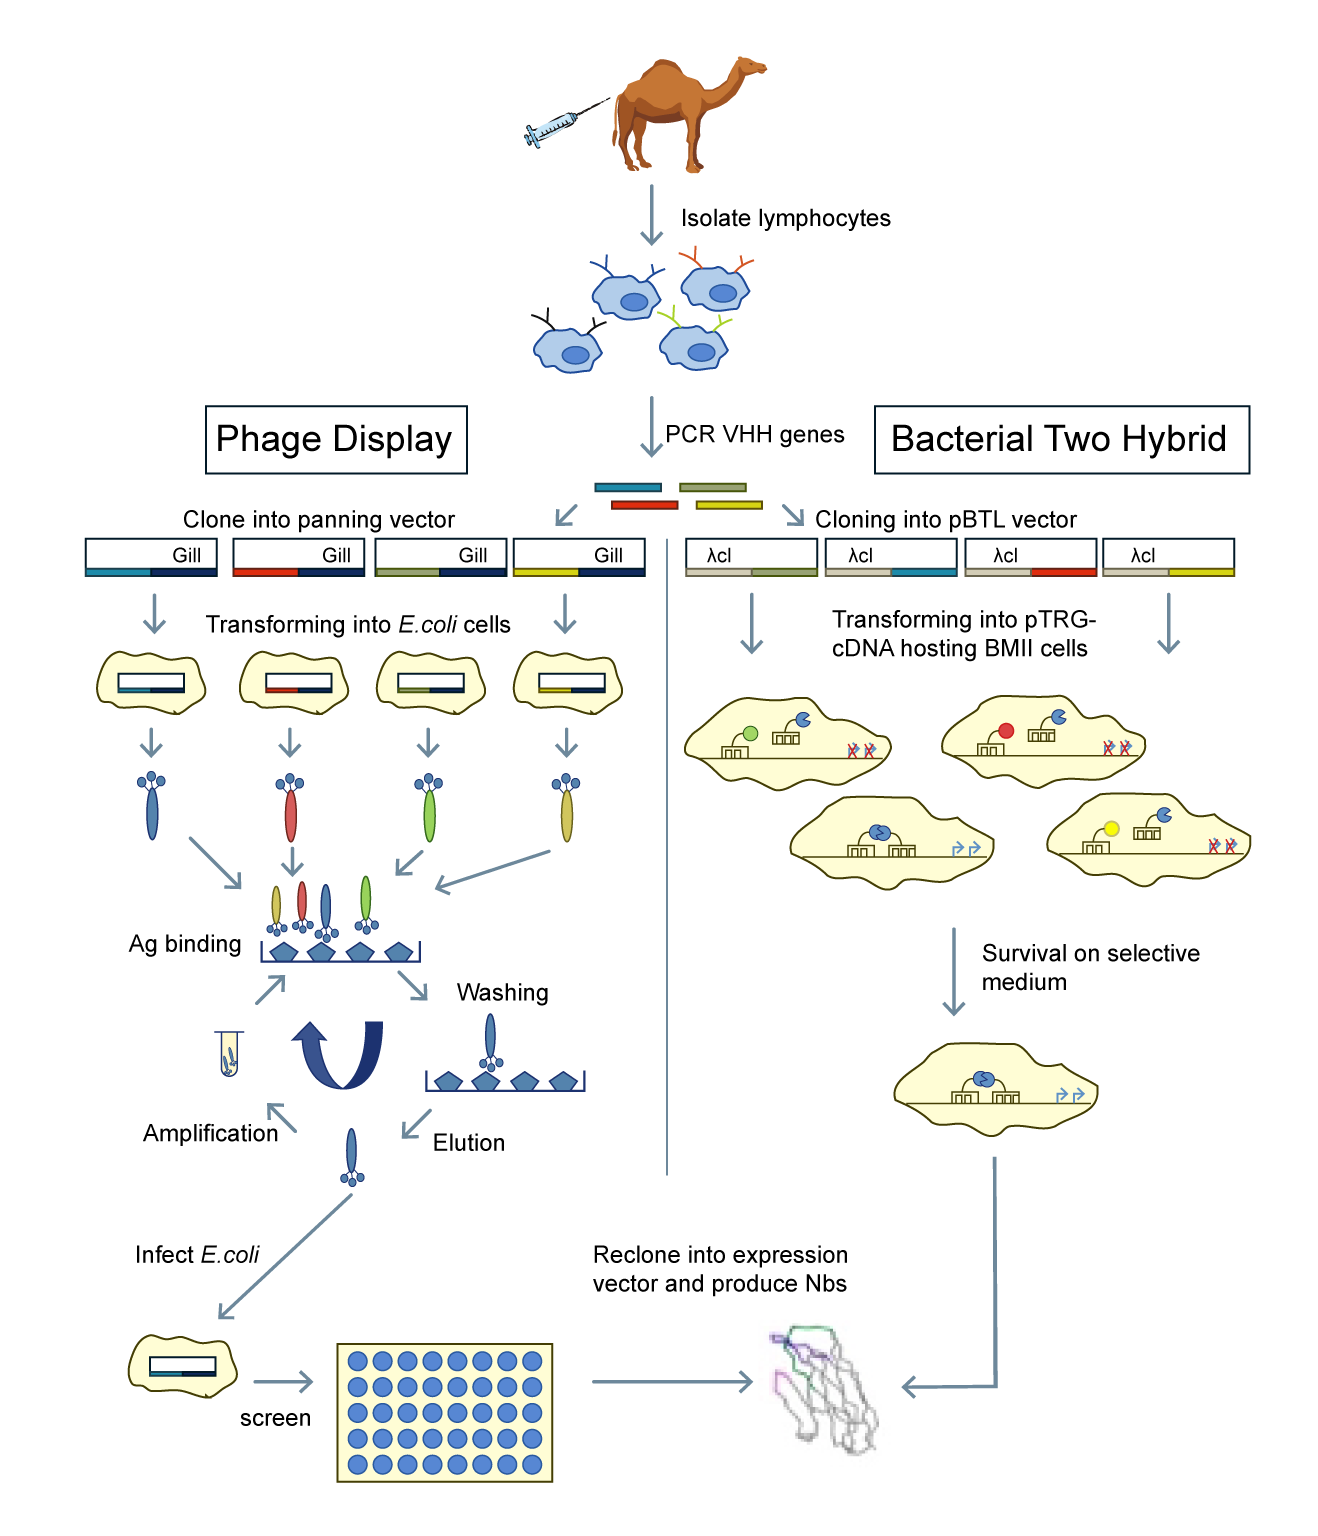 Schematic representation of the bacterial-two-hybrid strategy and the phage display method.